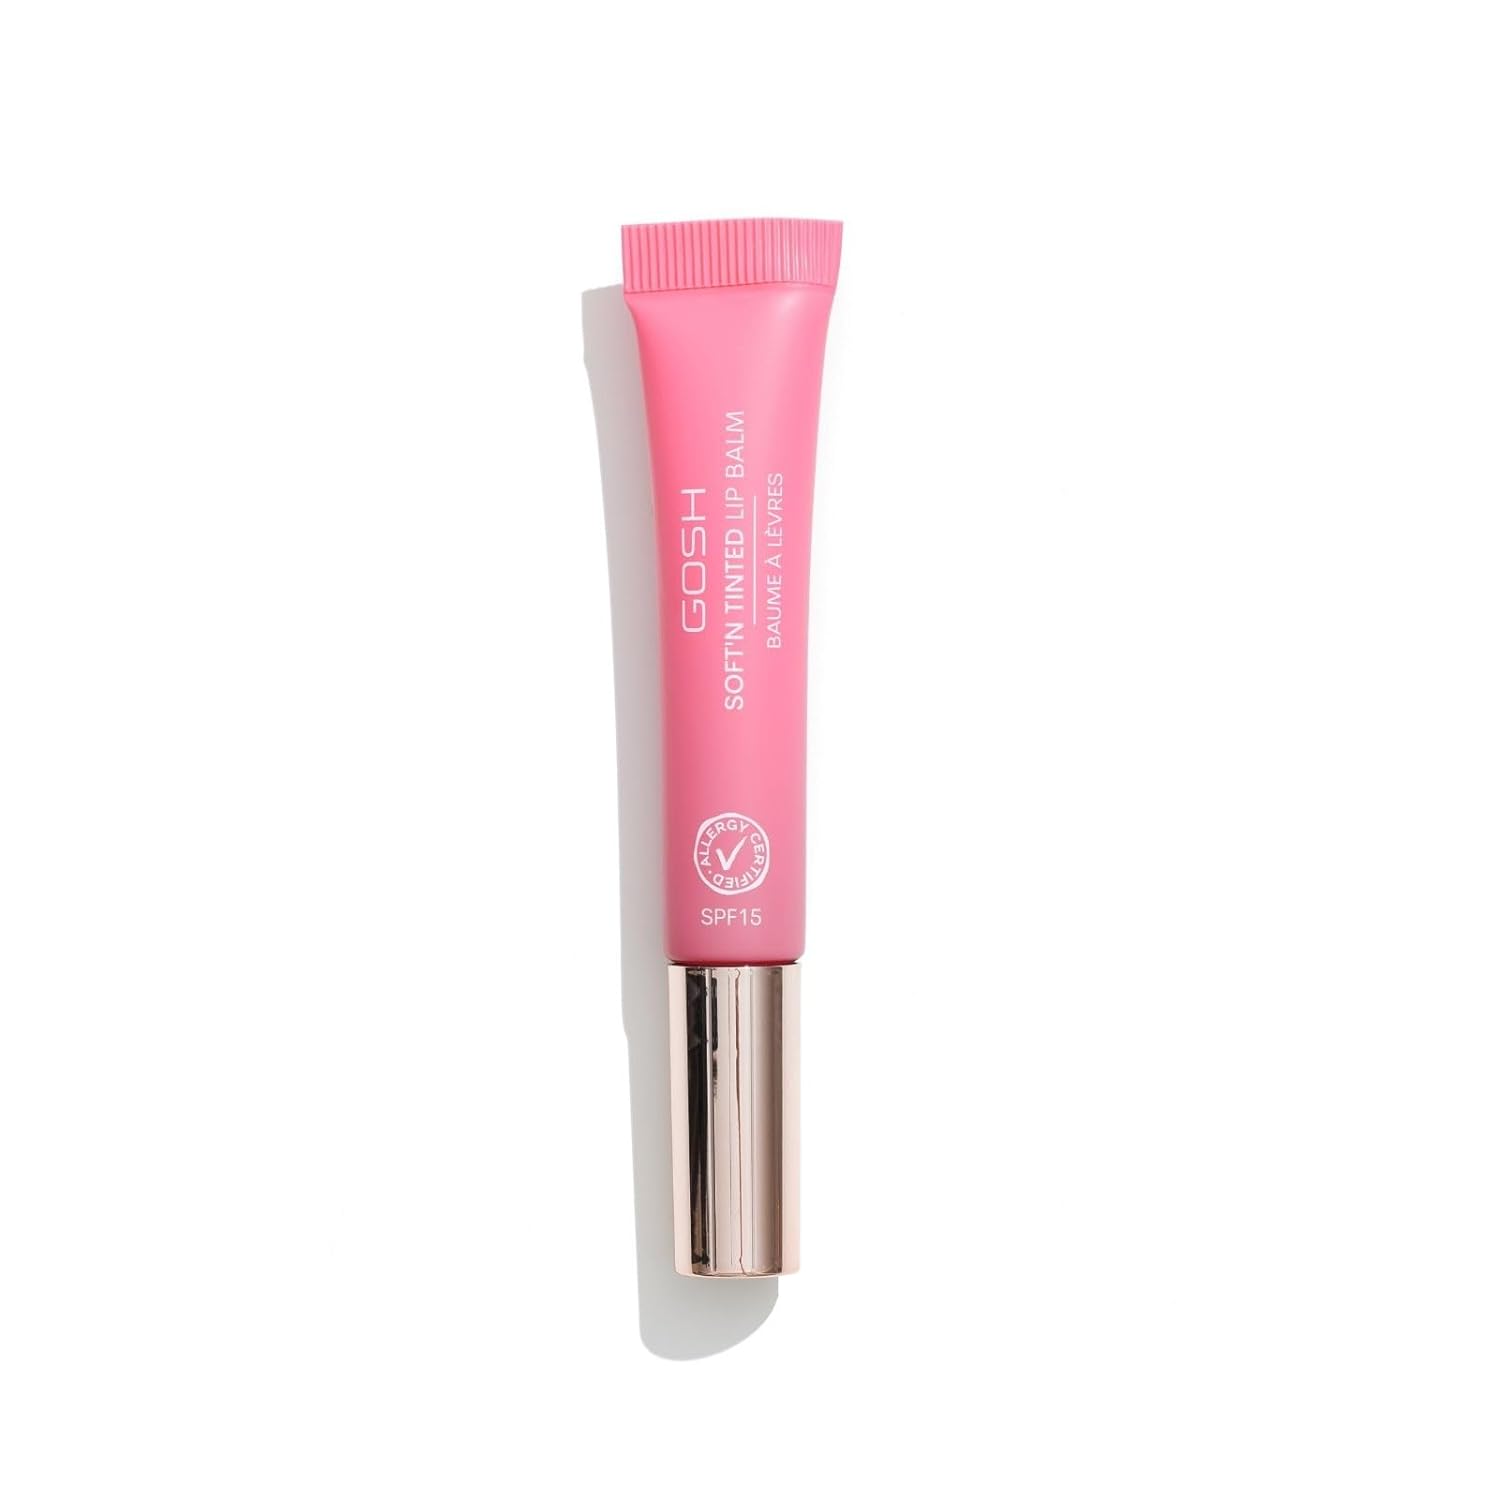 GOSH Tinted Lip Balm with SPF 15 I Vegan Lip Care Pen with Colour in Pink Rose (005) I Smooth Soft Lips without Gluing I Fragrance-Free Glossy Booster I Moisturising Lip Balm